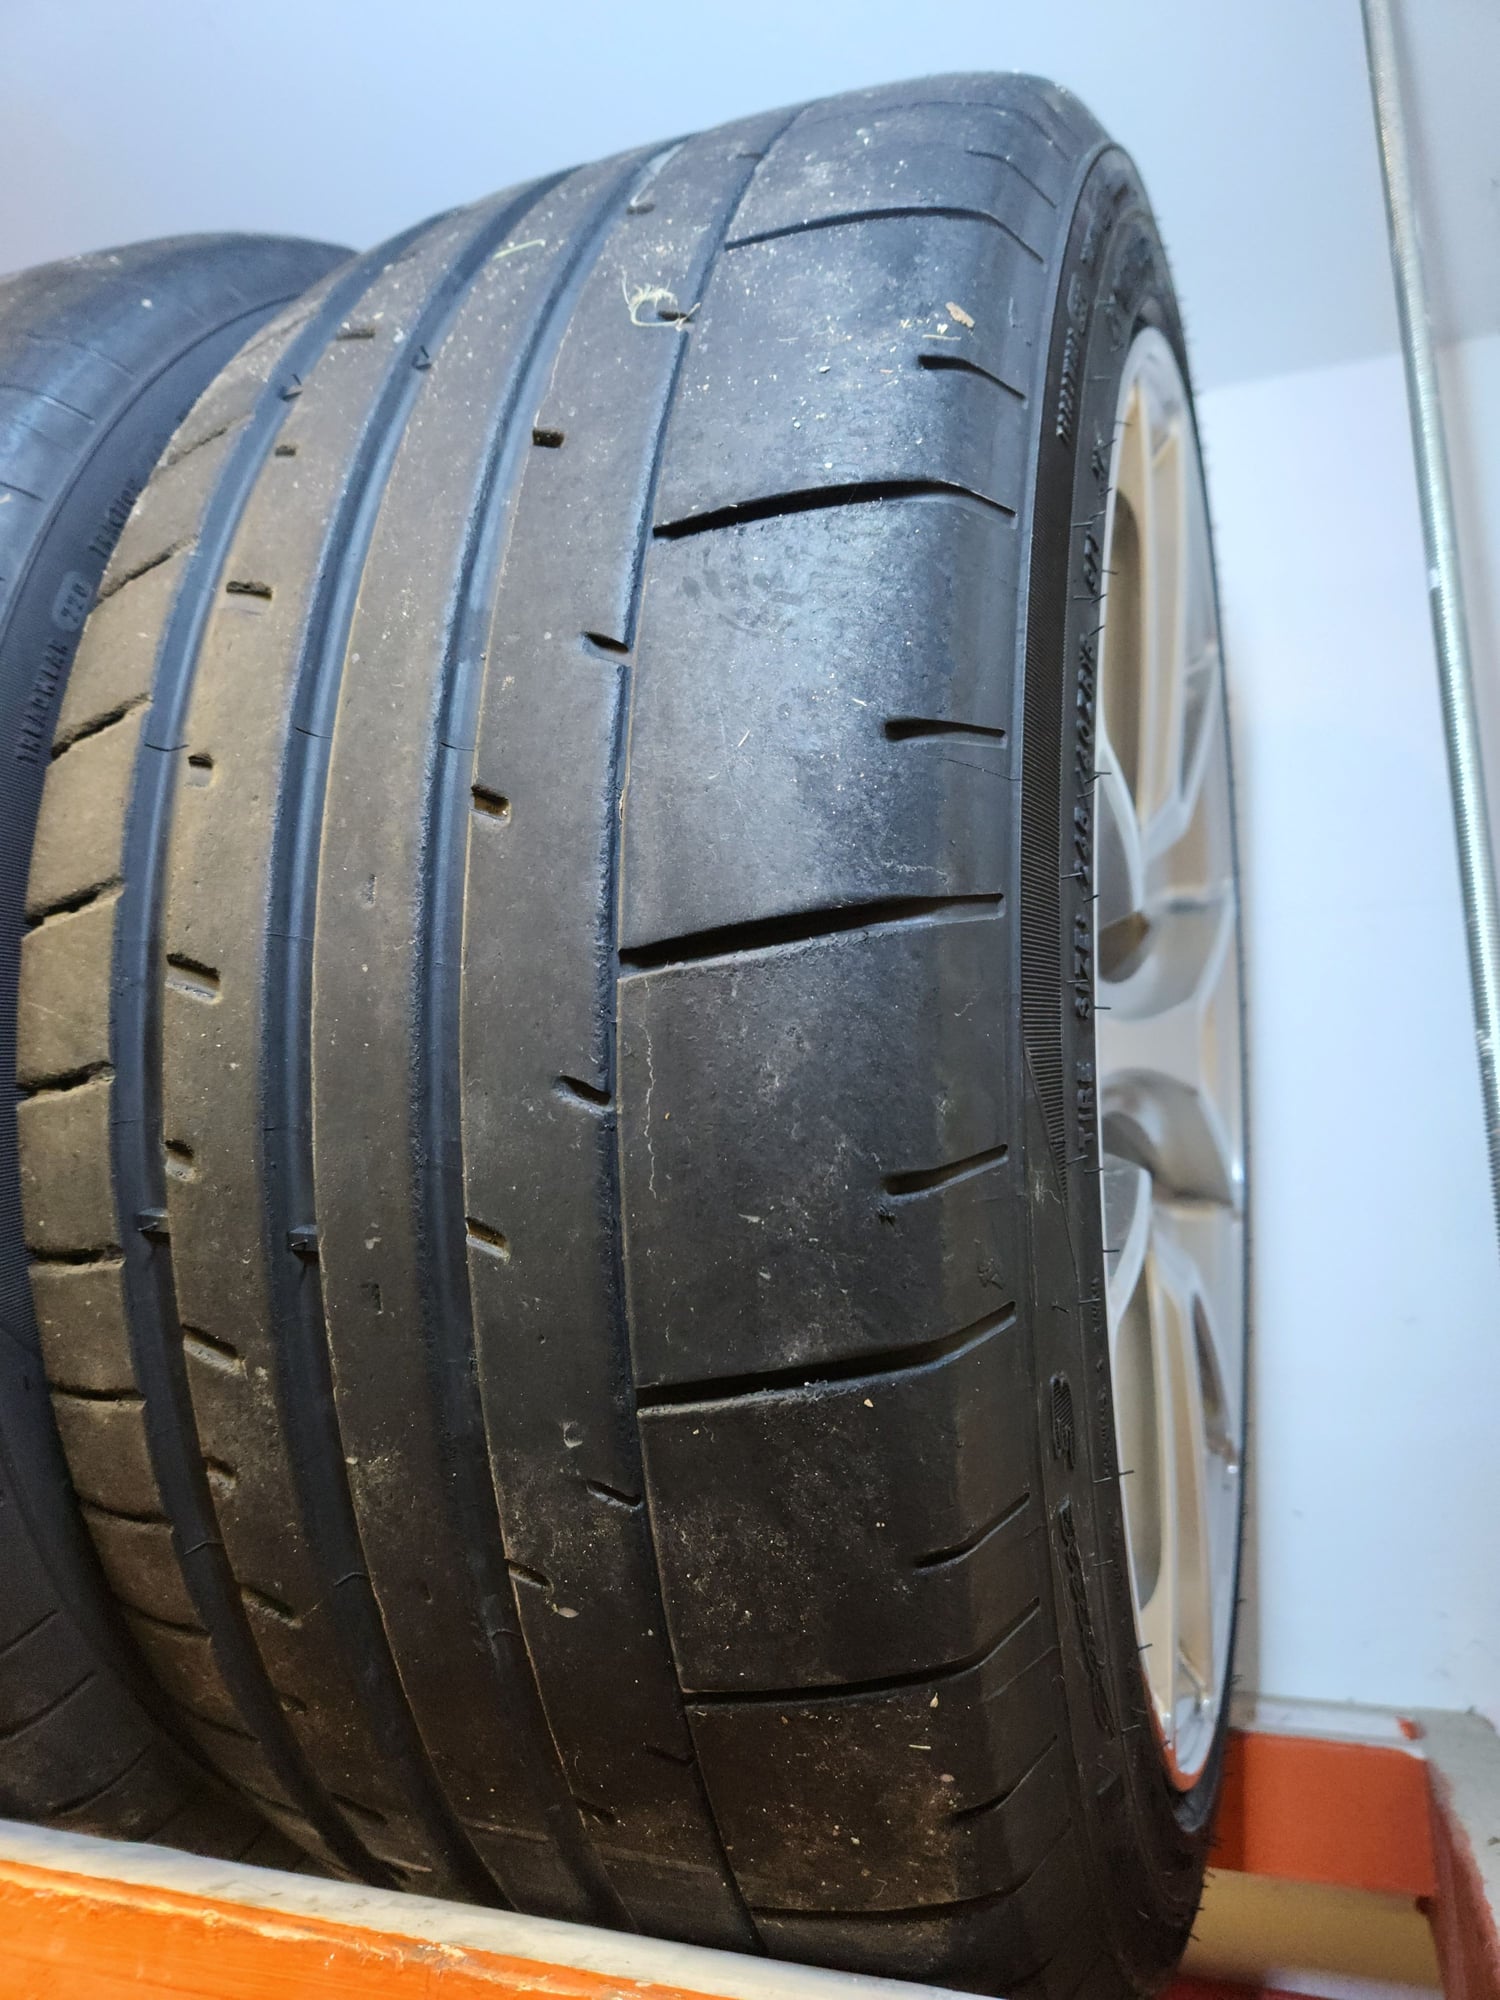 Goodyear Supercar 3 tires - Initial Impressions - Page 3 - Rennlist ...